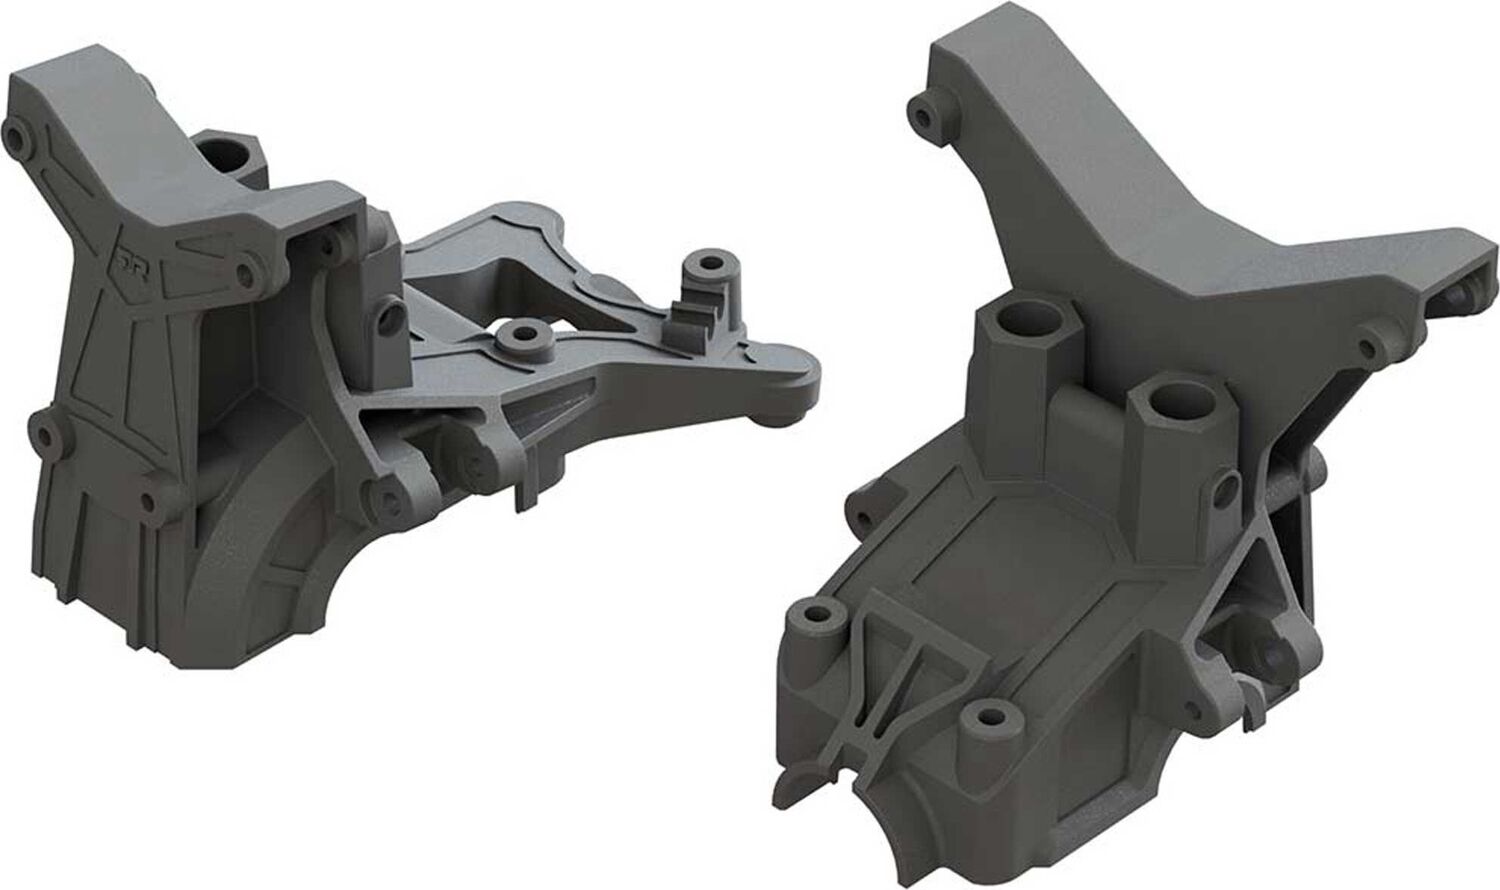 Composite Front Rear Upper Gearbox Covers and Shock Tower